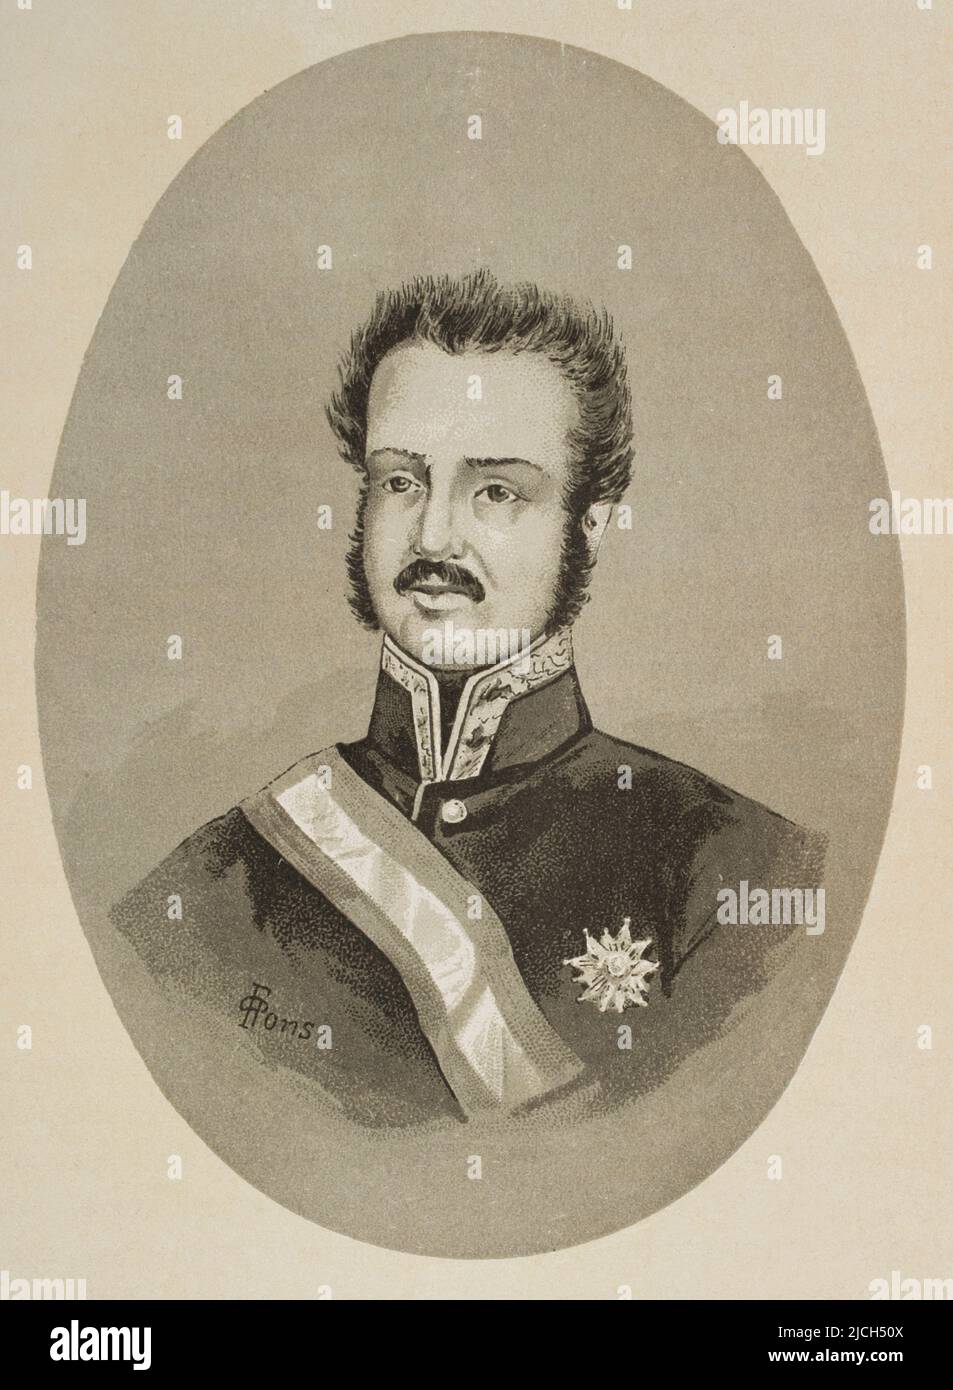 Luis Fernández de Córdoba y Valcárcel (1798-1840). Spanish lieutenant general. Of absolutist ideas, during the reign of Ferdinand VII he uprised against the government during the Liberal Triennium, being one of the promoters of the failed uprising of the Royal Guard in Madrid on 7 July 1822, which forced him to go into exile in France. Portrait. 'Historia de la Revolución Española' (desde la Guerra de la Independencia a la Restauración en Sagunto), by Vicente Blasco Ibáñez. Volume II. Published in Barcelona, 1891. Stock Photo